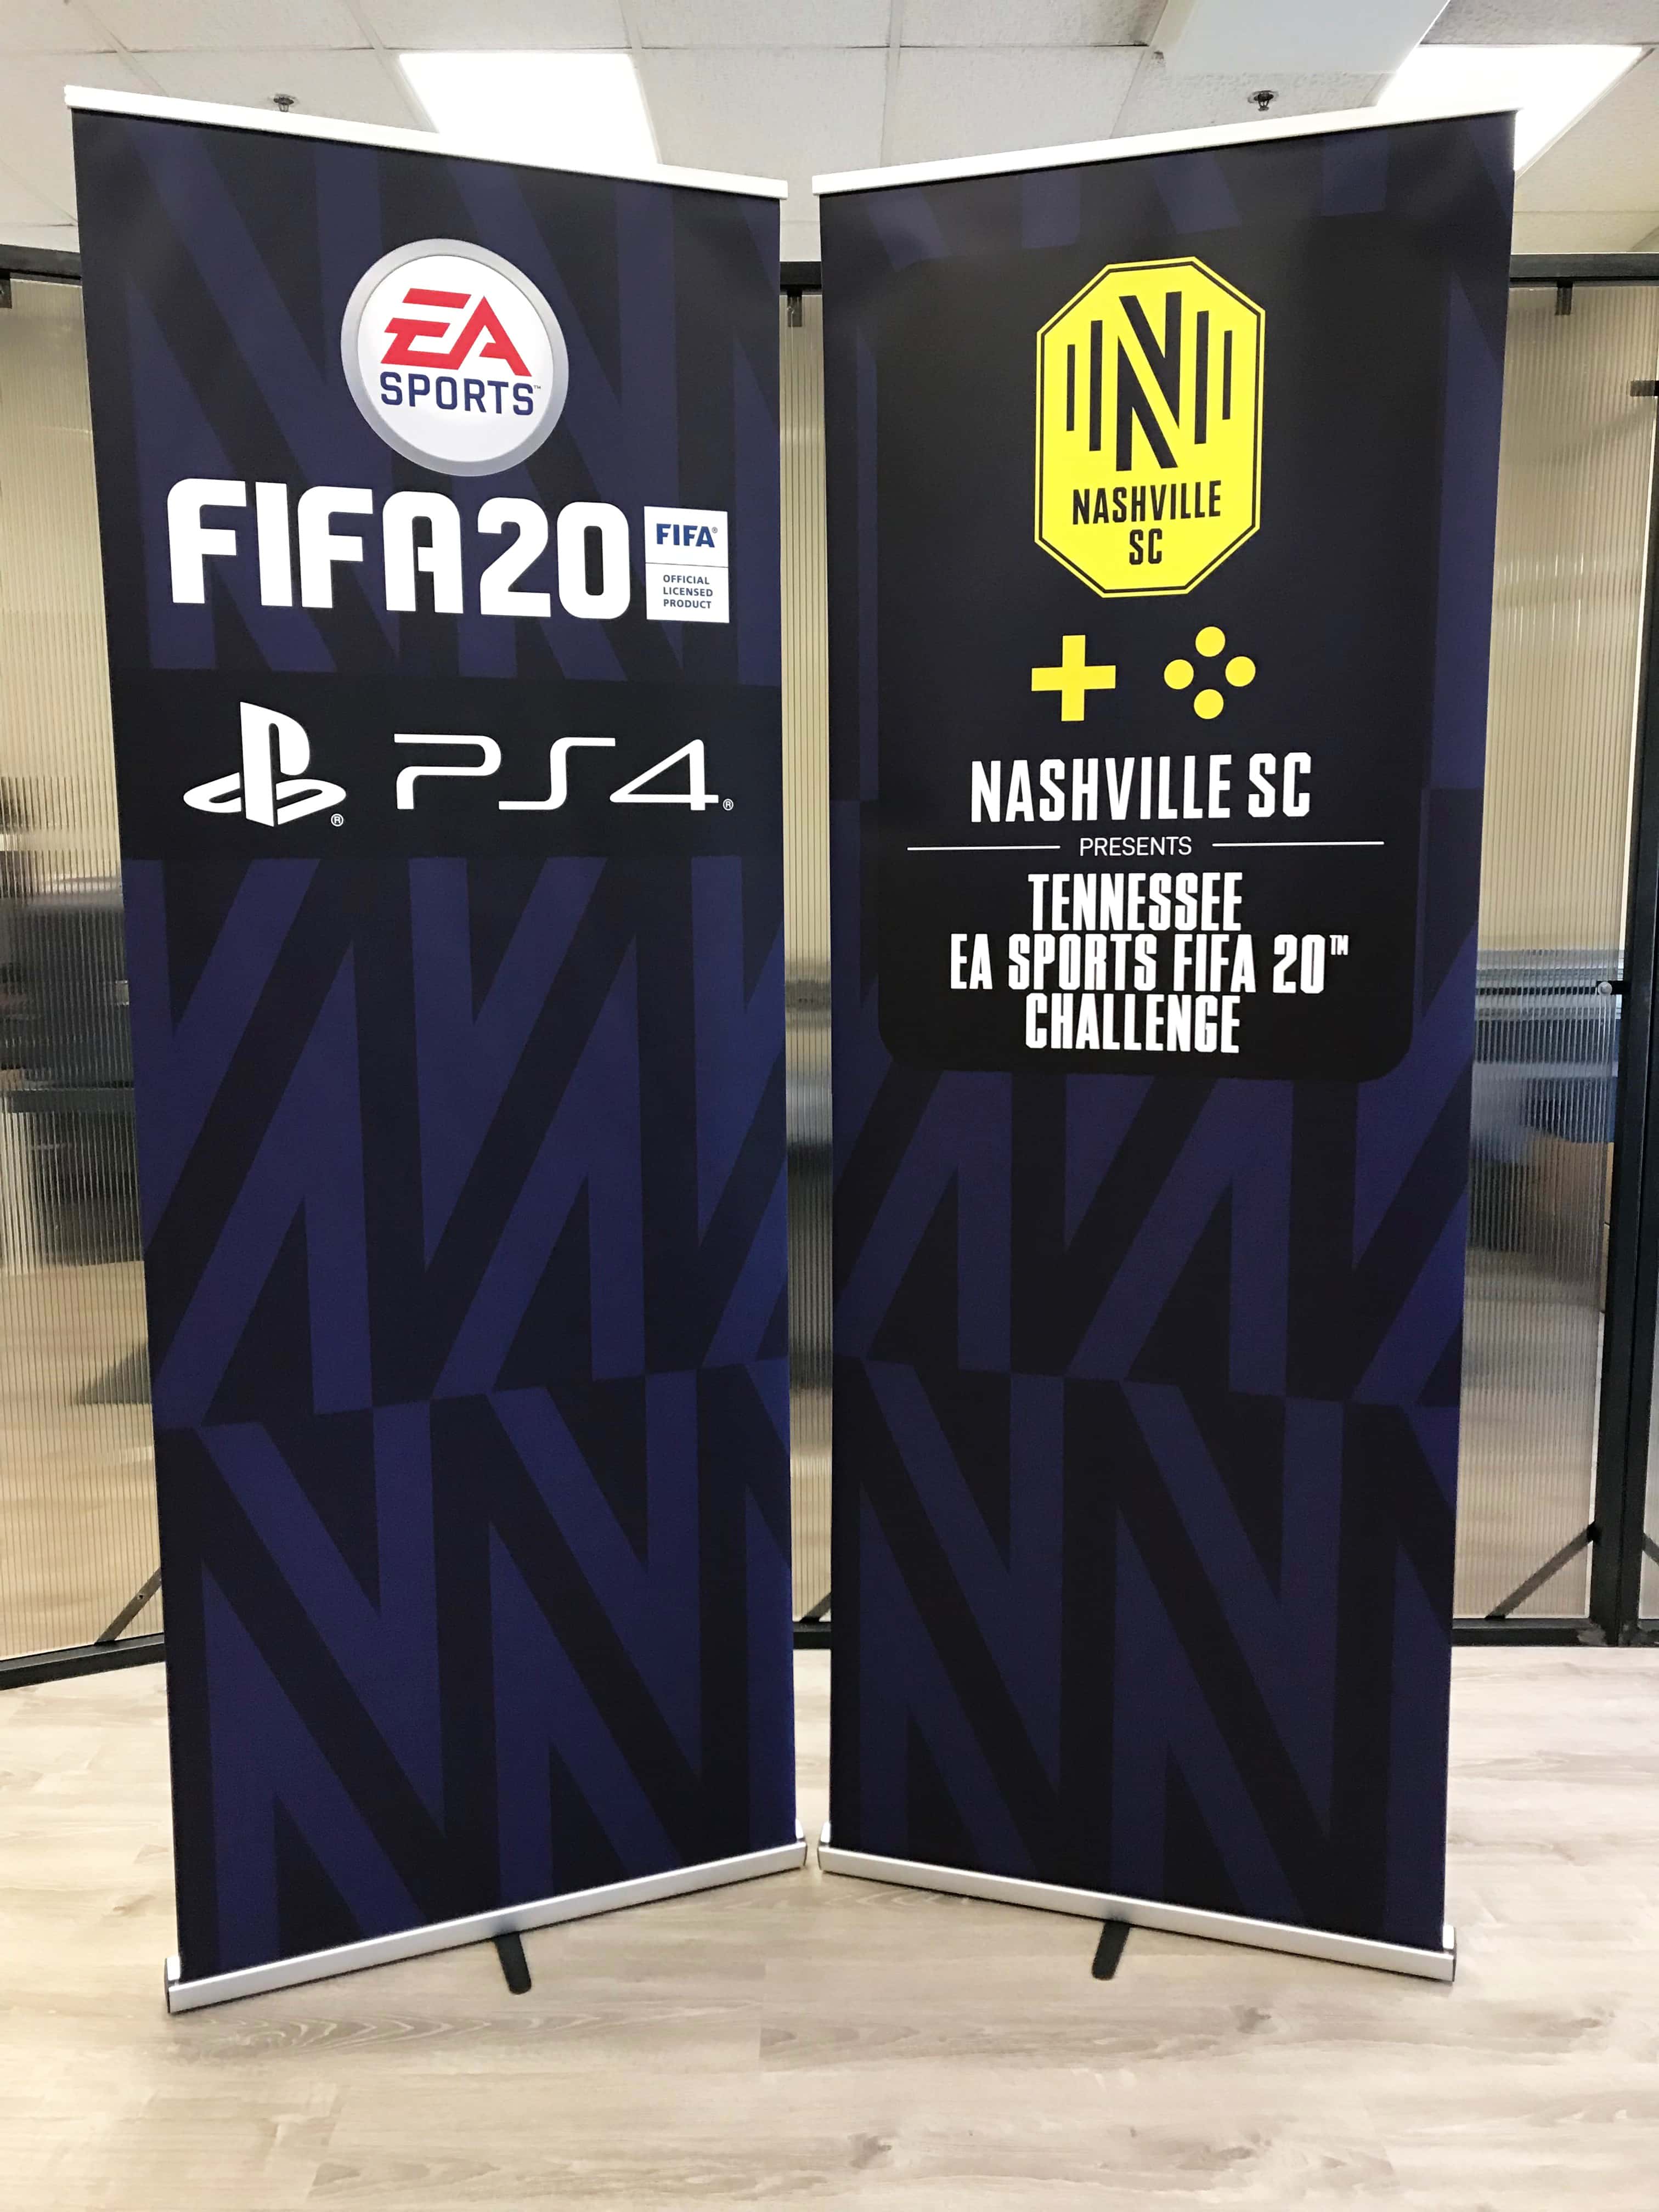 Custom Retractable Banners for the Nashville Soccer Club by 12-Point SignWorks in Franklin, TN.